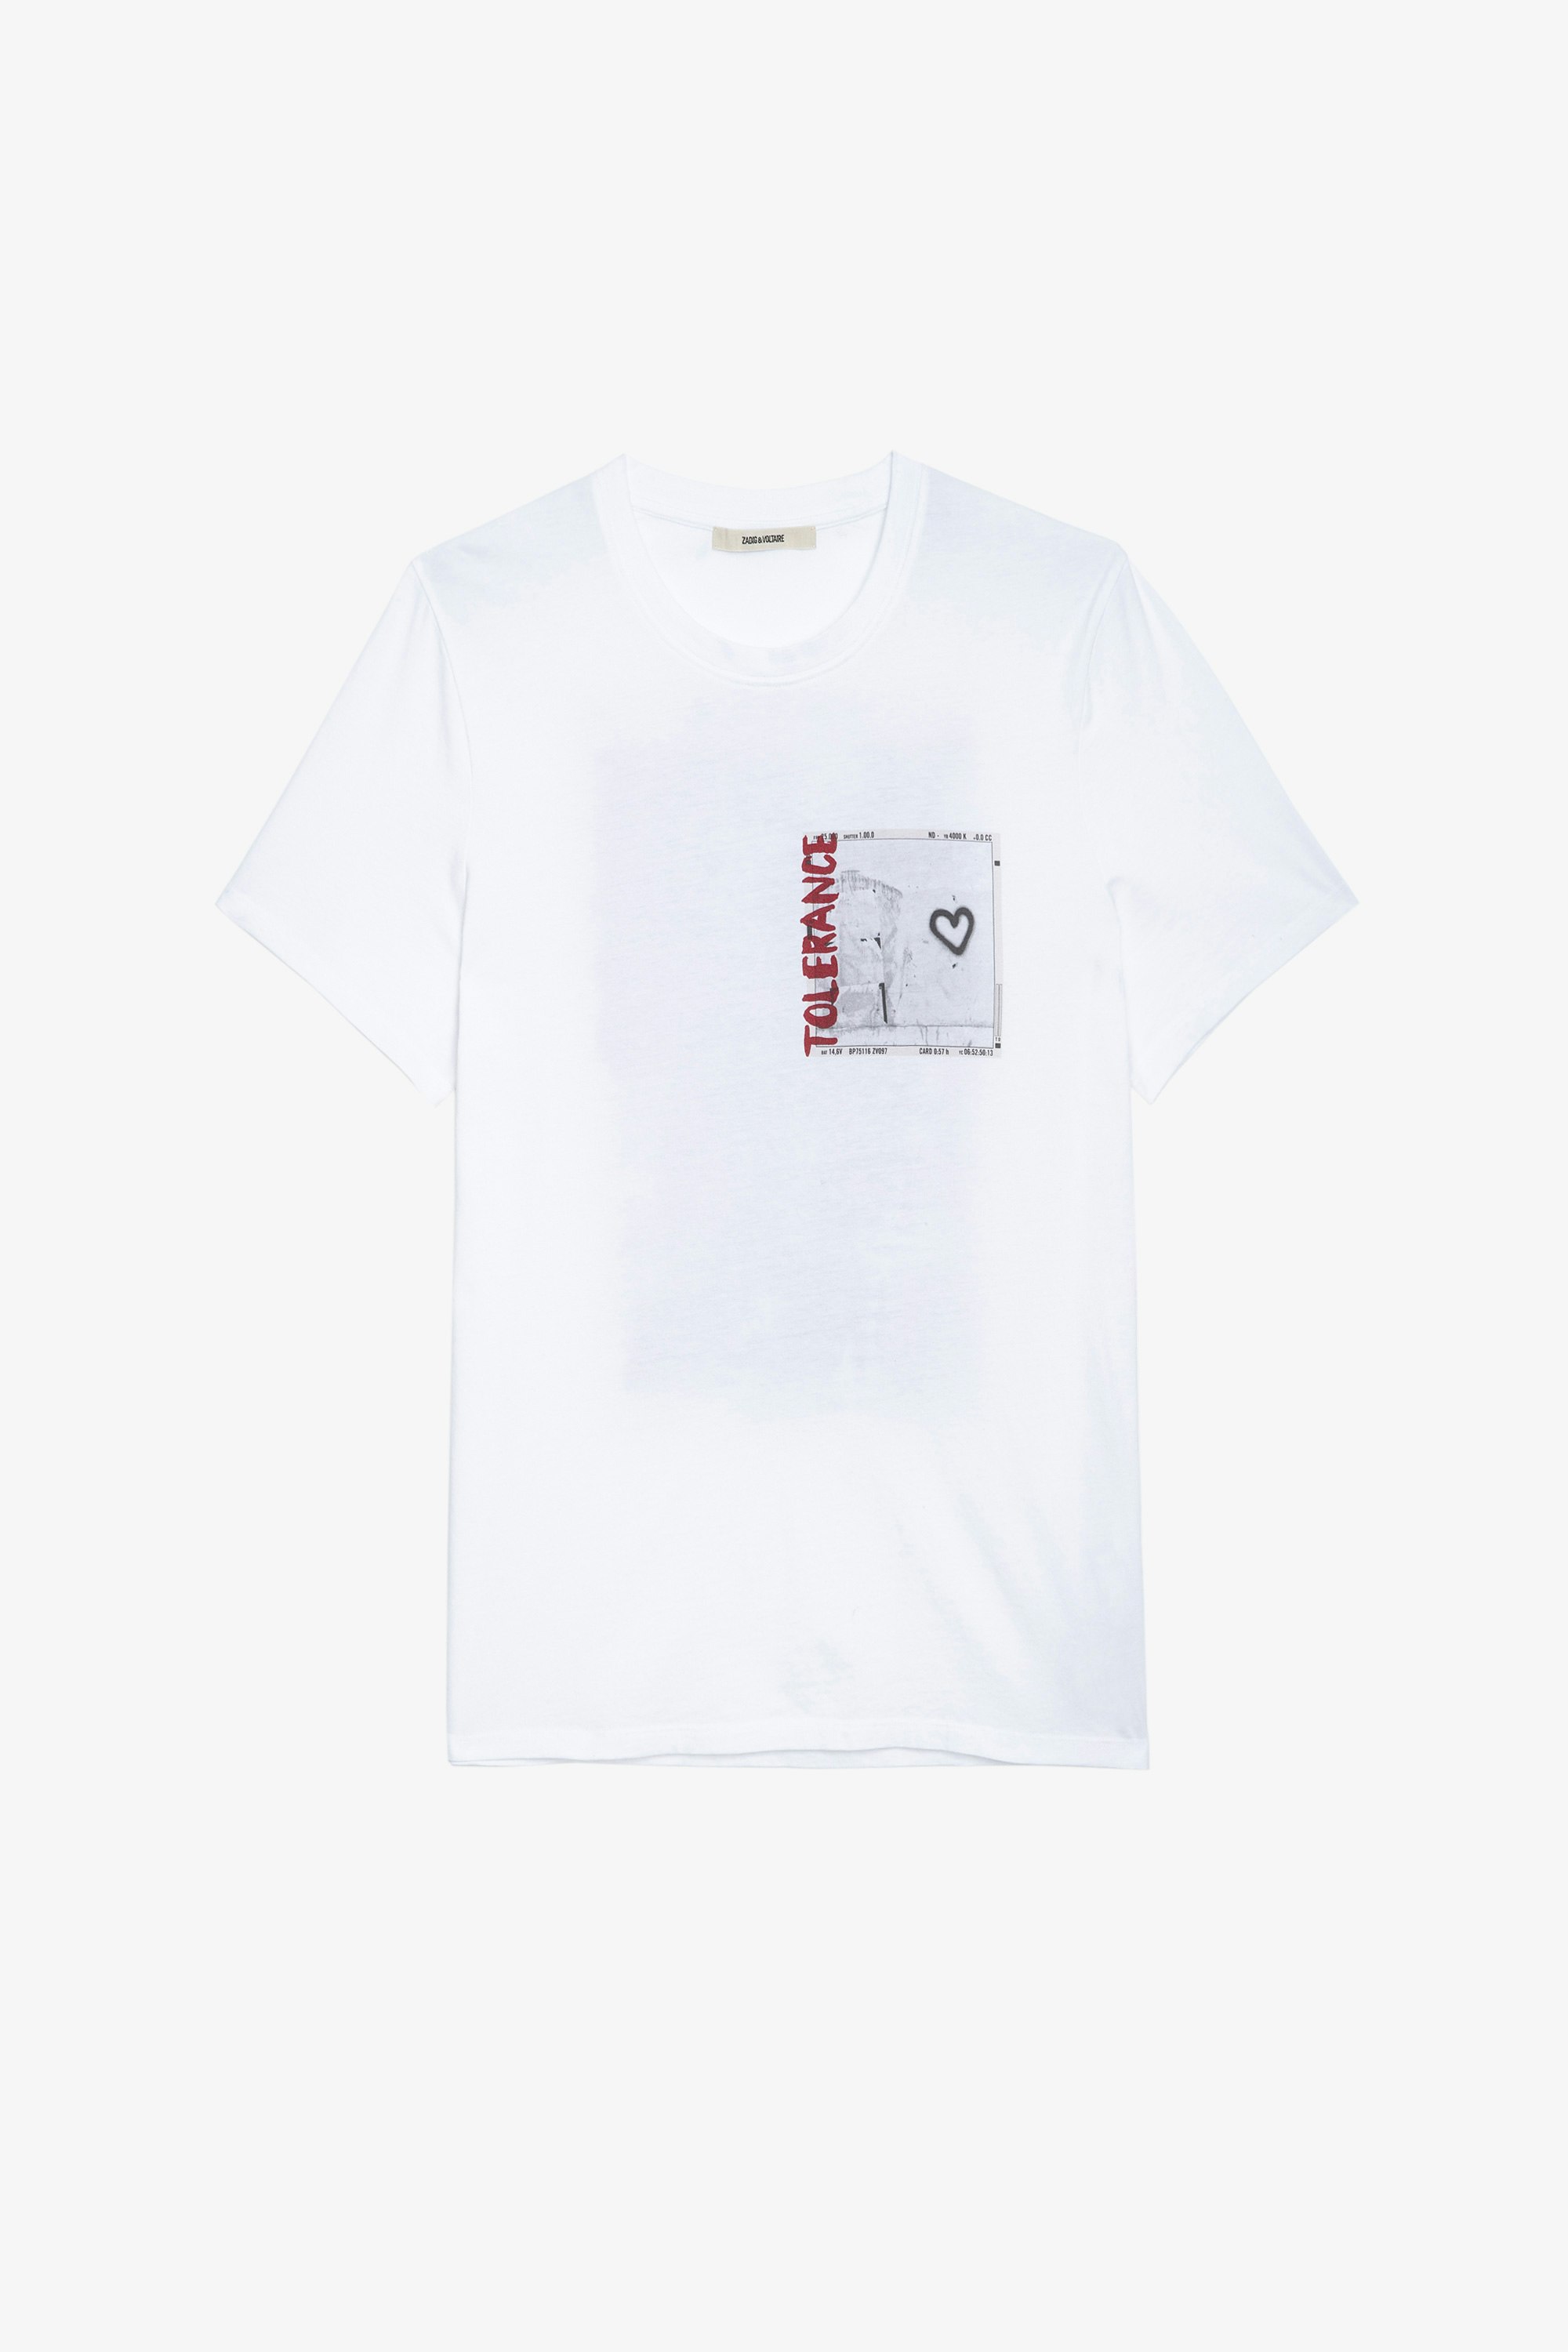 Ted Photoprint T-shirt Men's white cotton T-shirt with photoprint